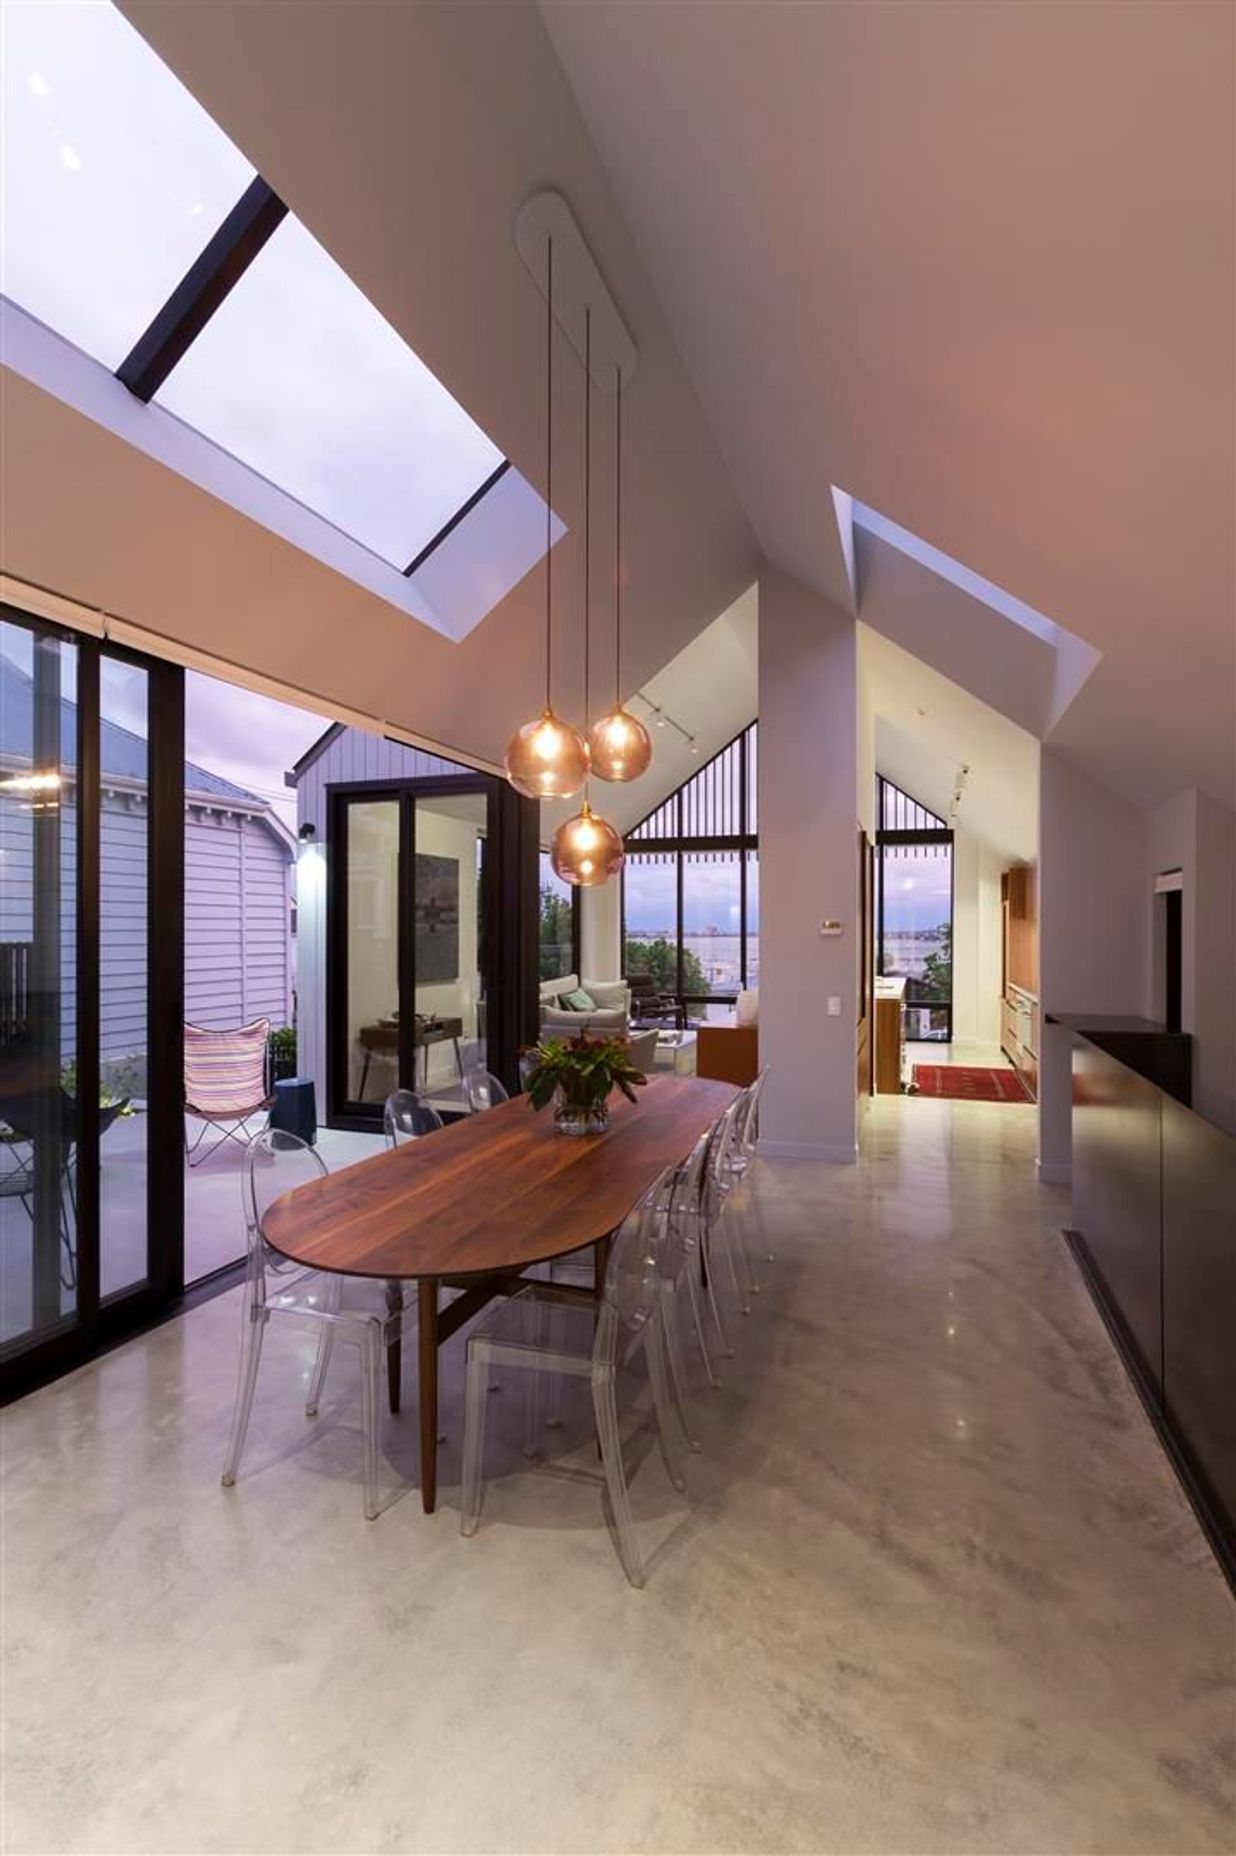 The floor-to-ceiling glazed gable end frames the view of the harbour while the layout of the living area provides clear sightlines from the rear of the level all the way through to the front.